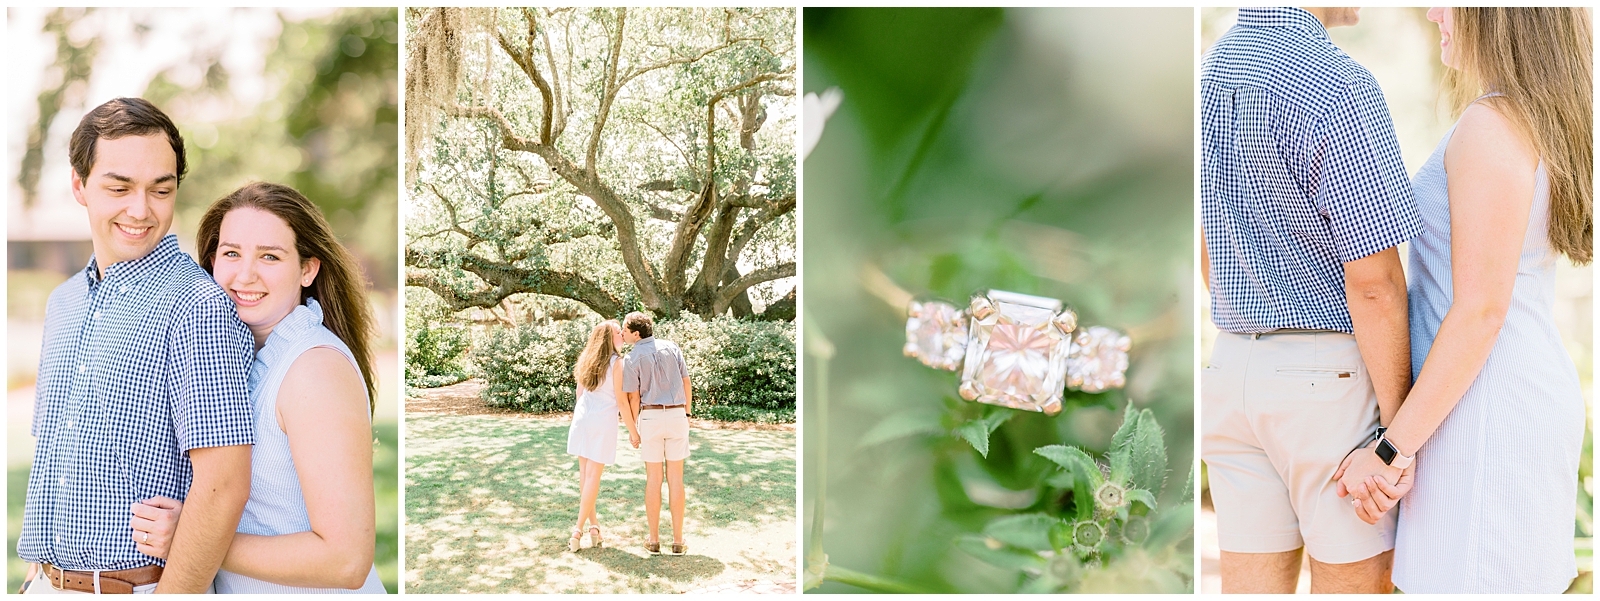 Engagement photos in Fairhope, Alabama at the Grand Hotel